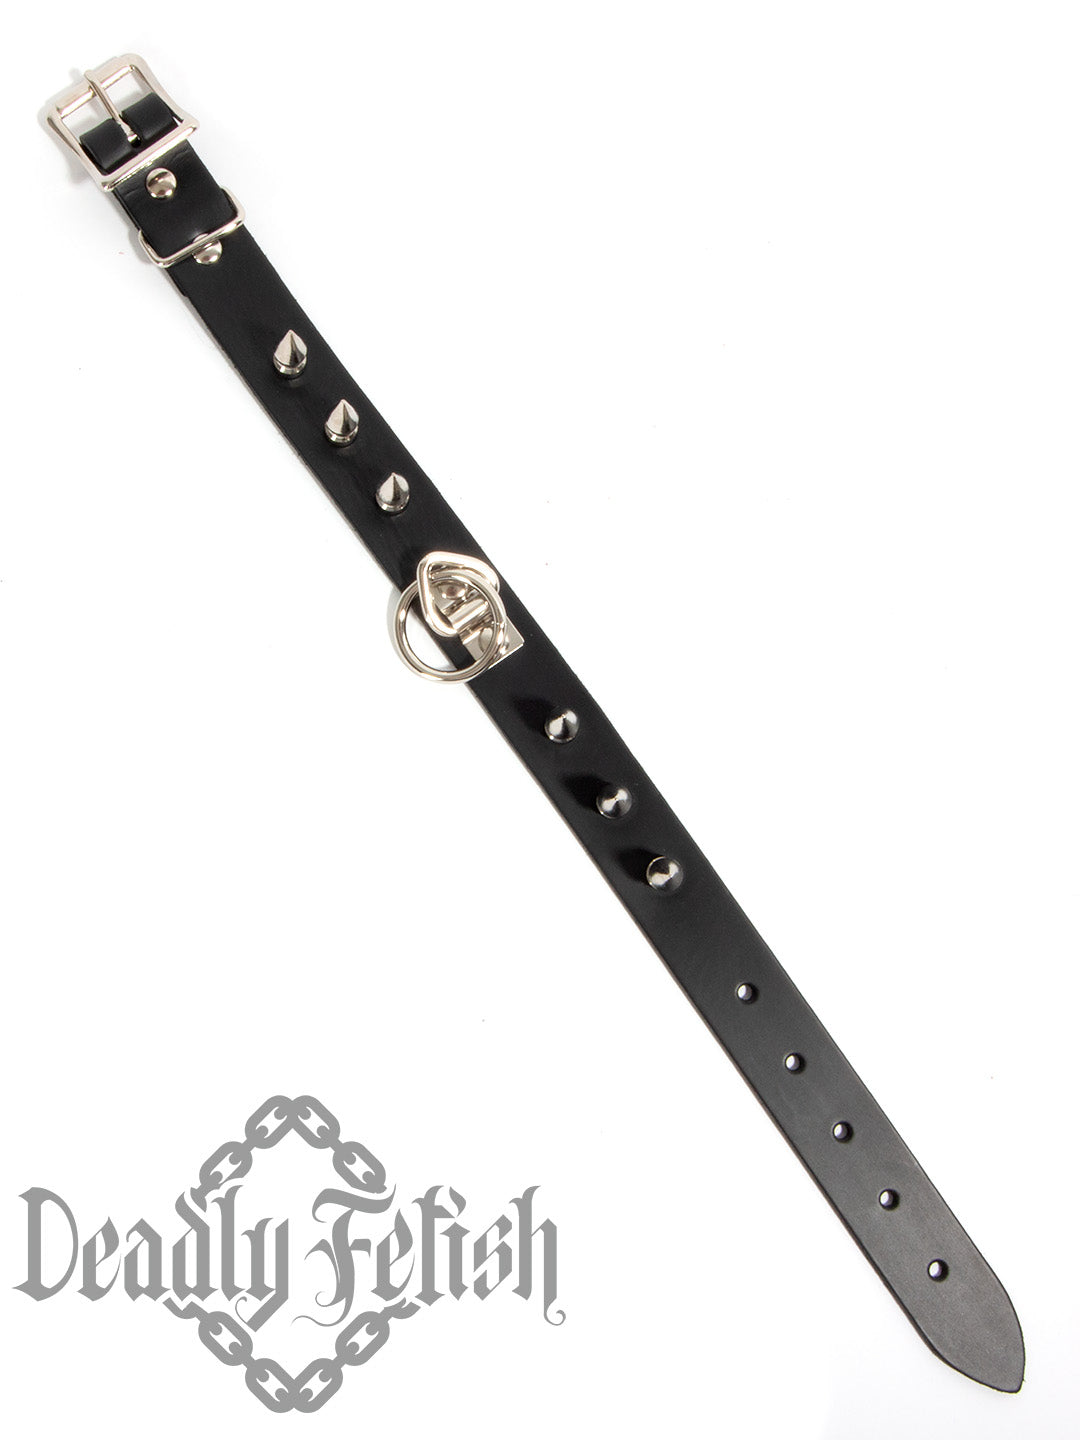 Deadly Fetish Leather: Collar #06